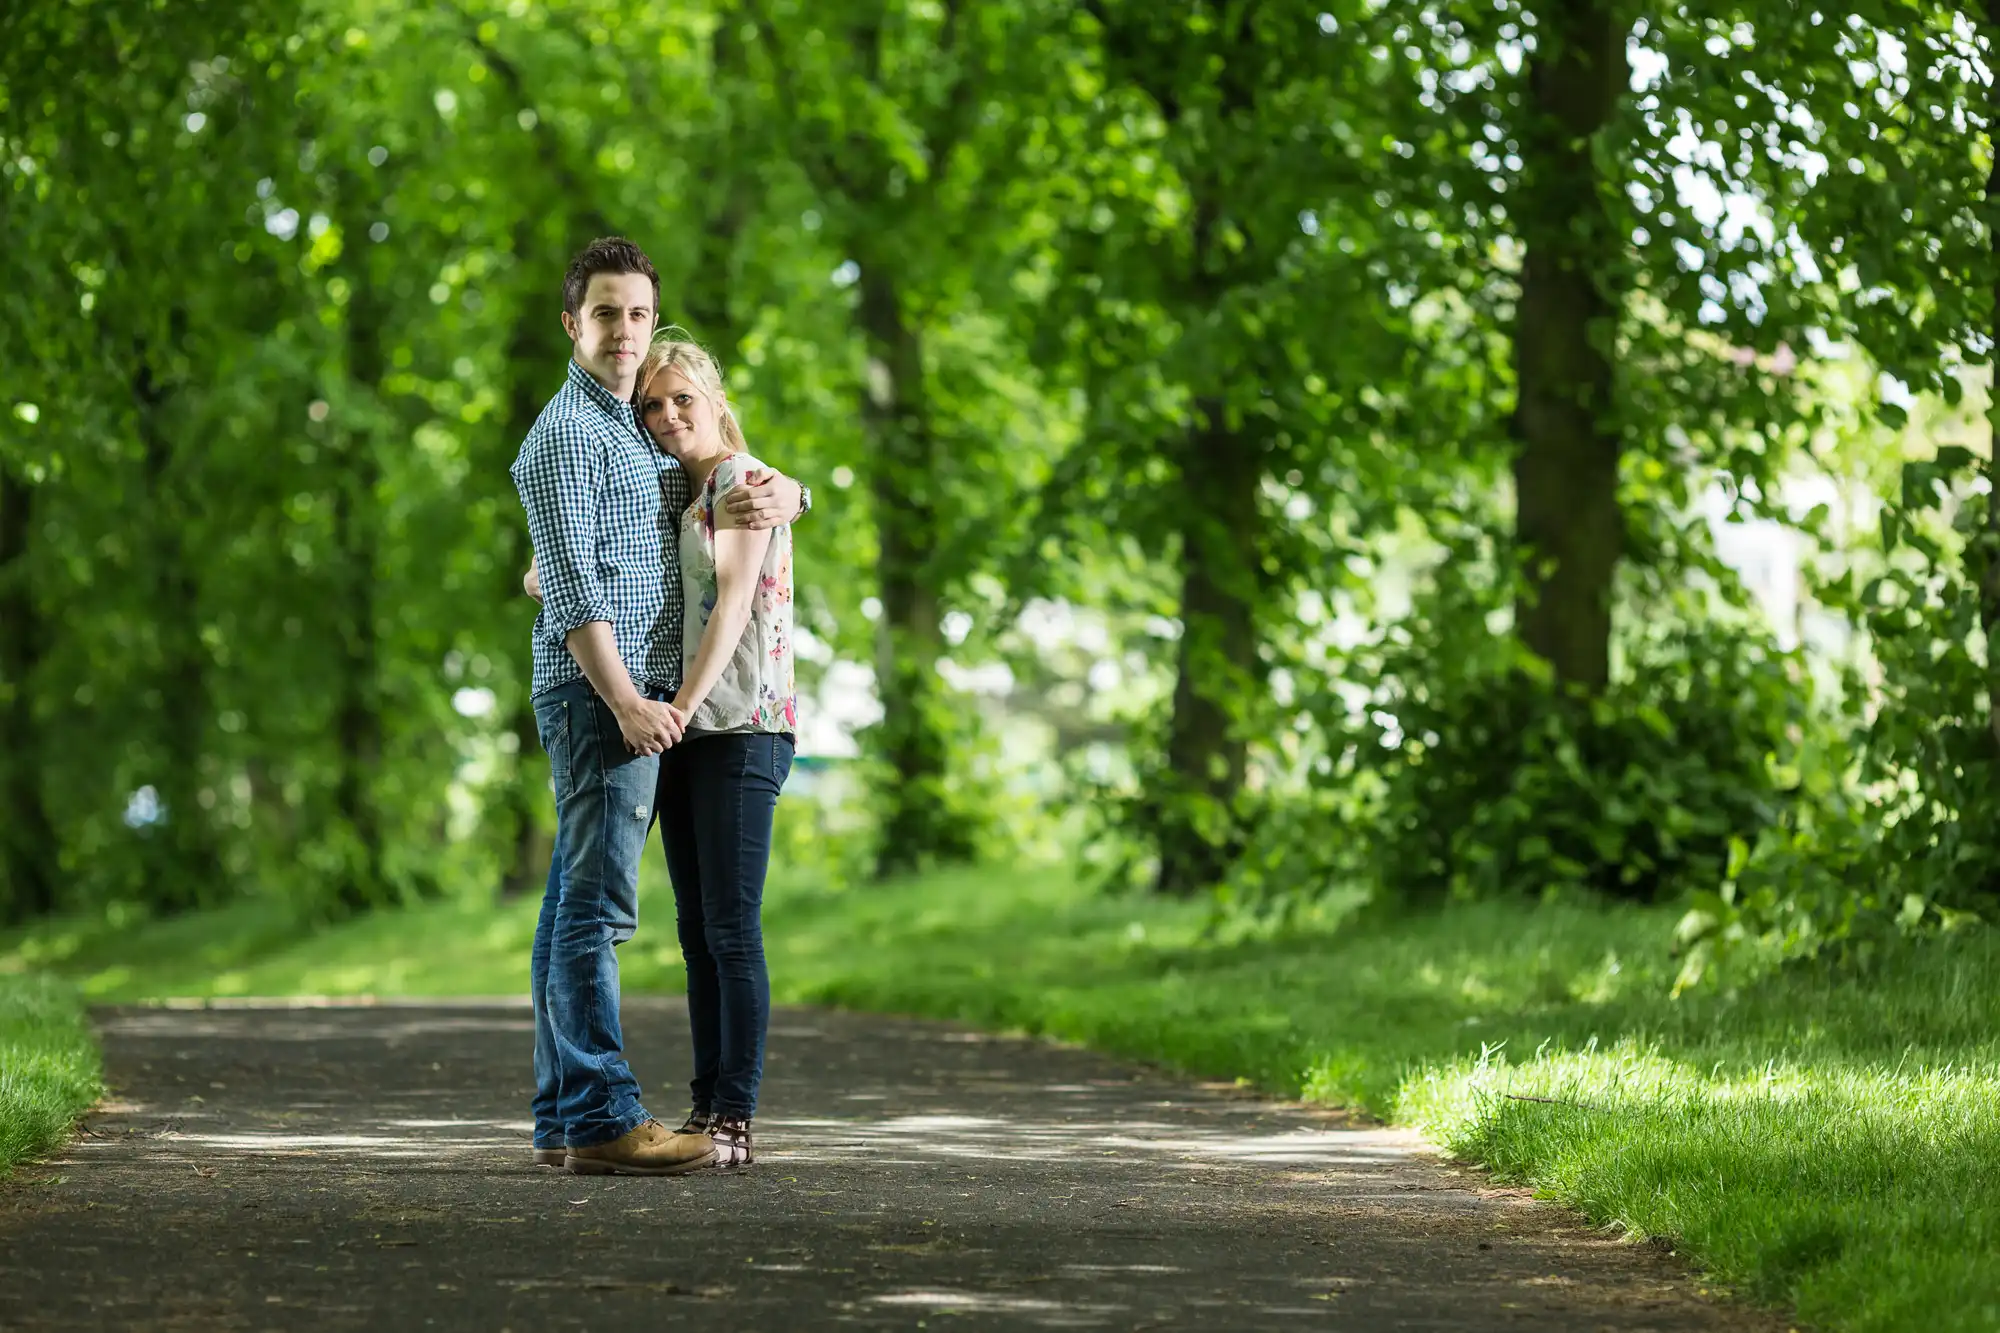 A couple embracing each other on a tree-lined path, with the man standing behind the woman, both looking gently towards the camera.